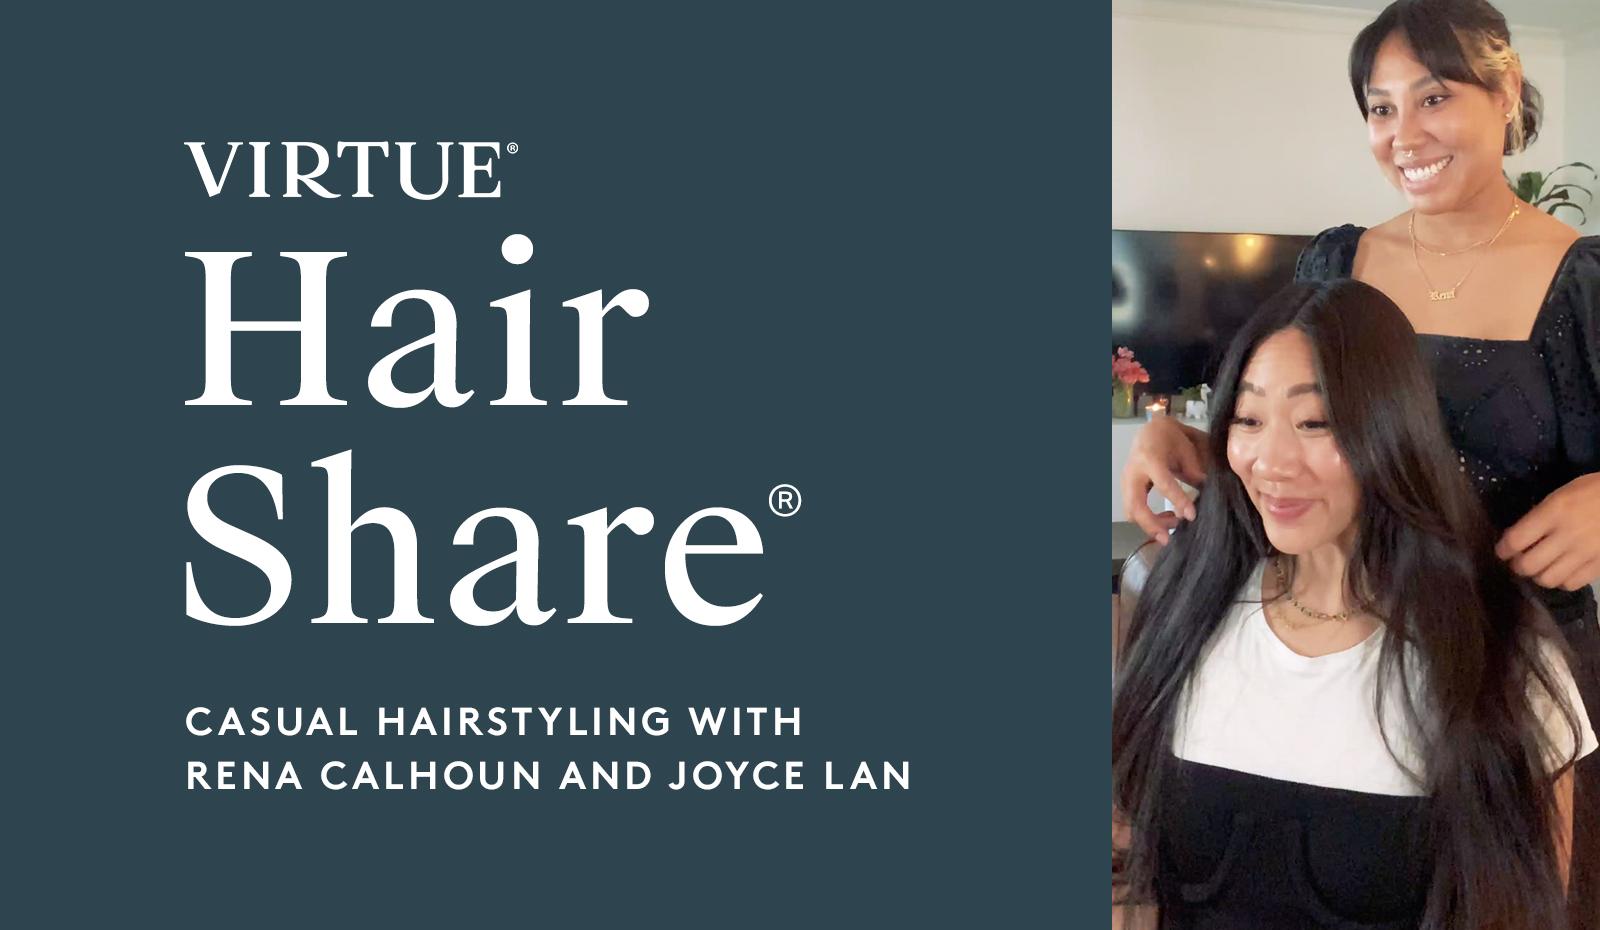 The Virtue Hair Share®: Casual Hairstyling With Rena Calhoun And Joyce Lan